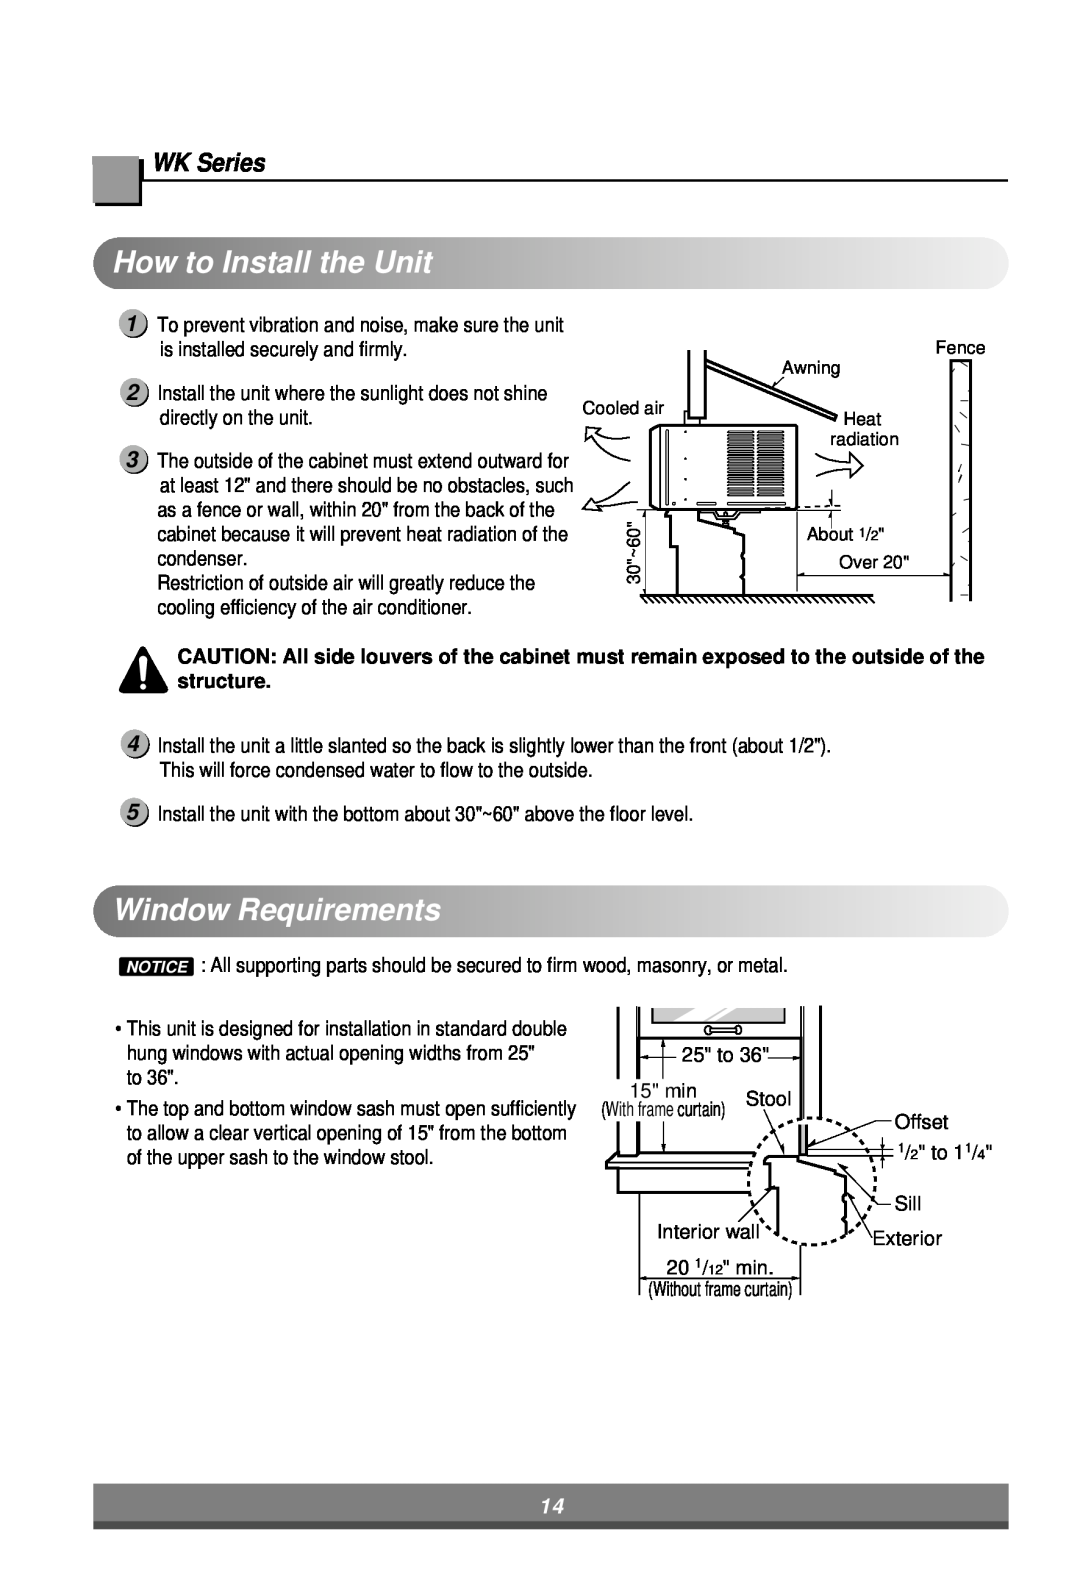 LG Electronics LW7000ER owner manual HowtoInstall the Unit, WindowRequirements, WK Series 